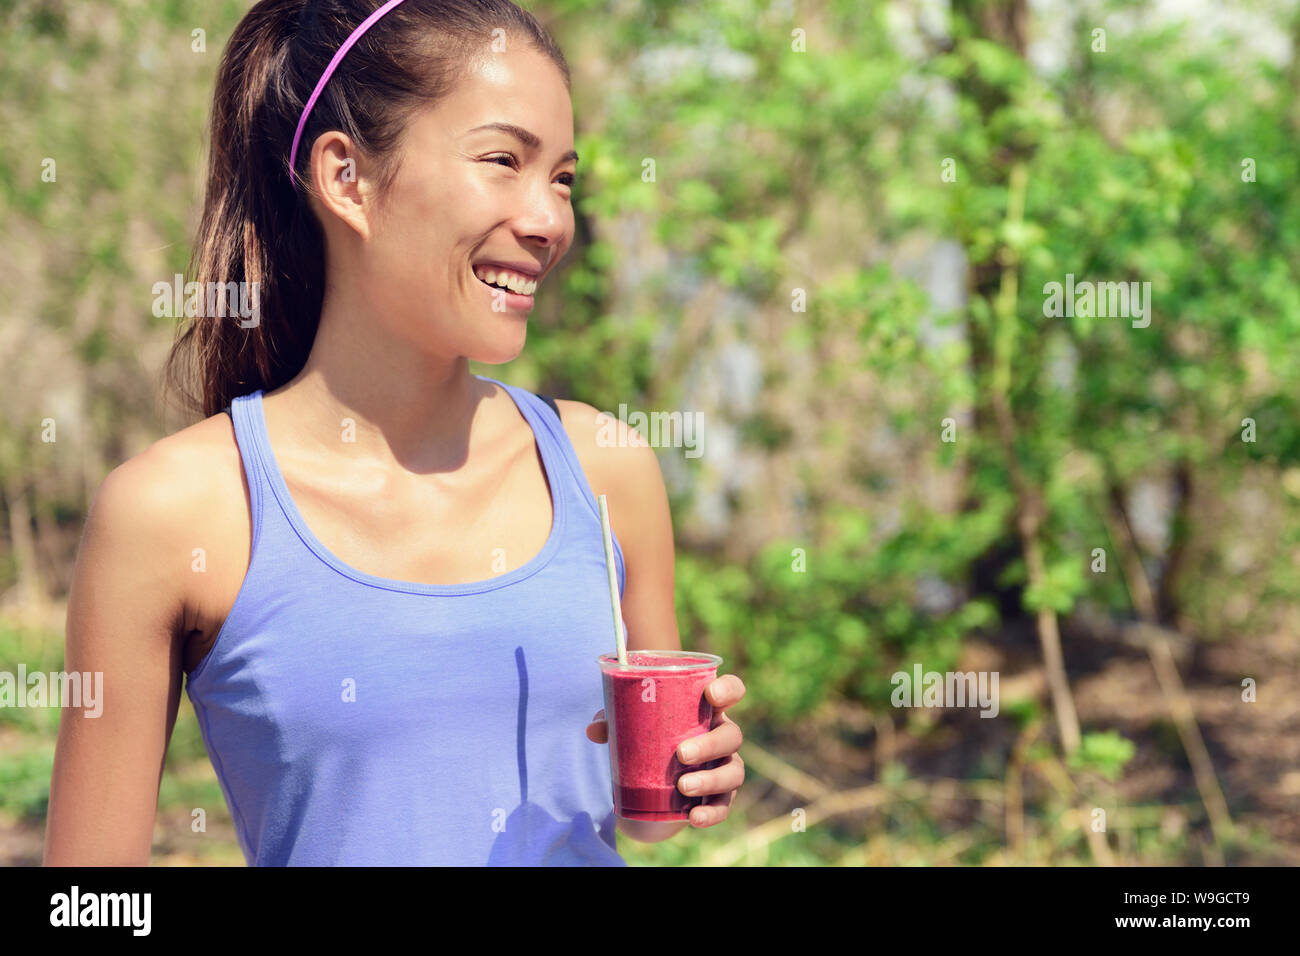 Healthy Asian woman drinking fruit smoothie drink in outdoor forest park during summer. Young fit girl holding plastic cup clean eating for detox cleansing with berry or beet juice as part of a diet. Stock Photo